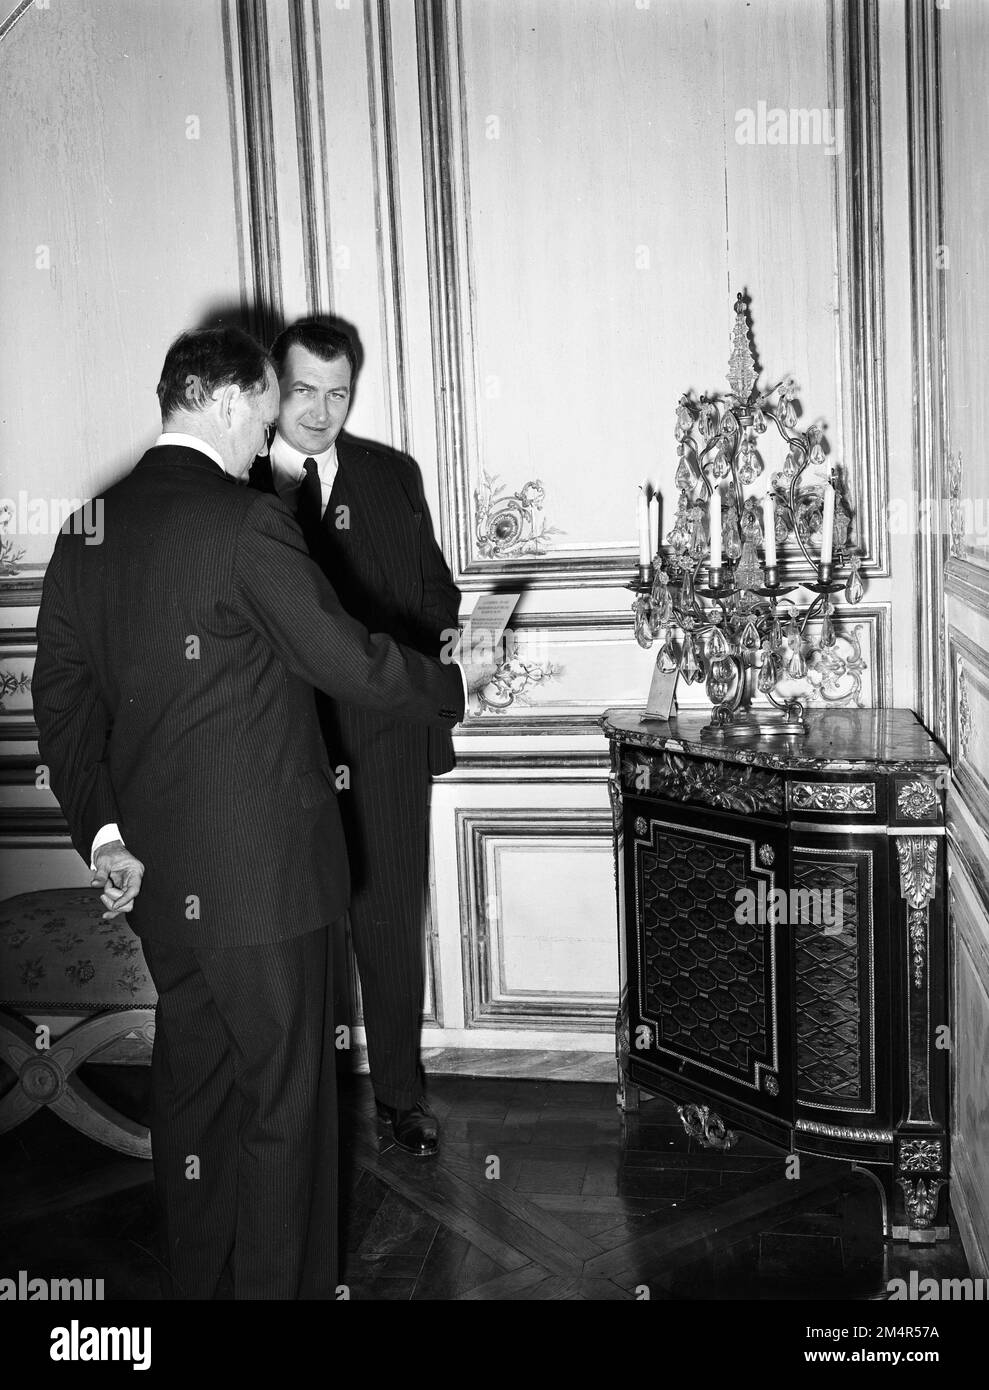 Versaille Palace, Sy Americains des Amis de Versailles Gives Recovered Piece of Furniture. Photographs of Marshall Plan Programs, Exhibits, and Personnel Stock Photo